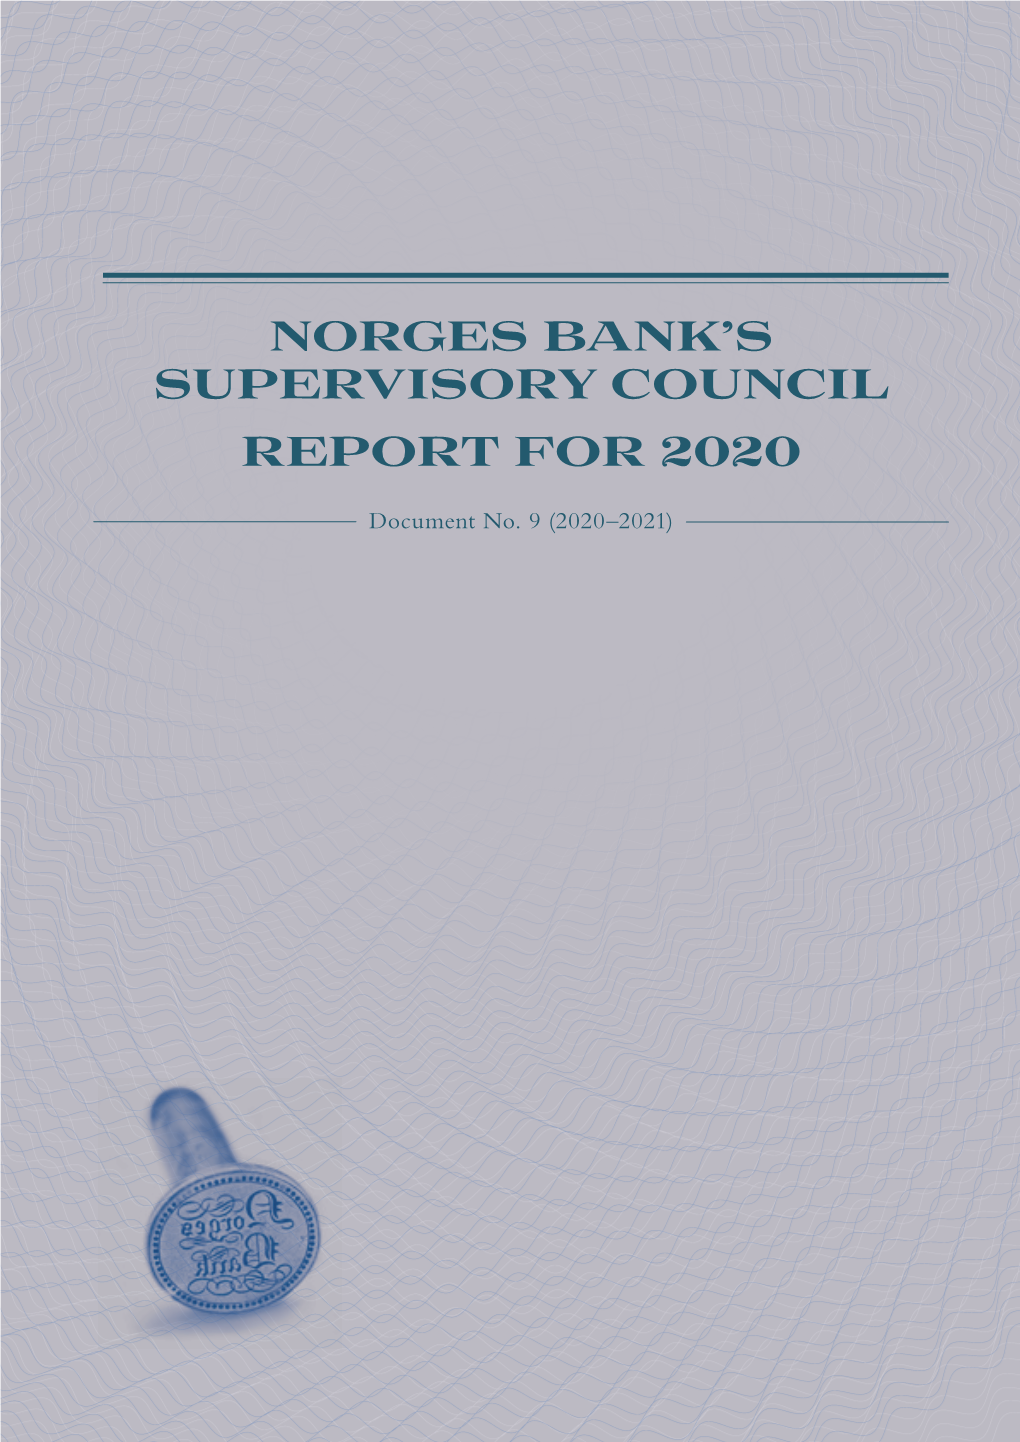 Norges Bank's Supervisory Council Report for 2020